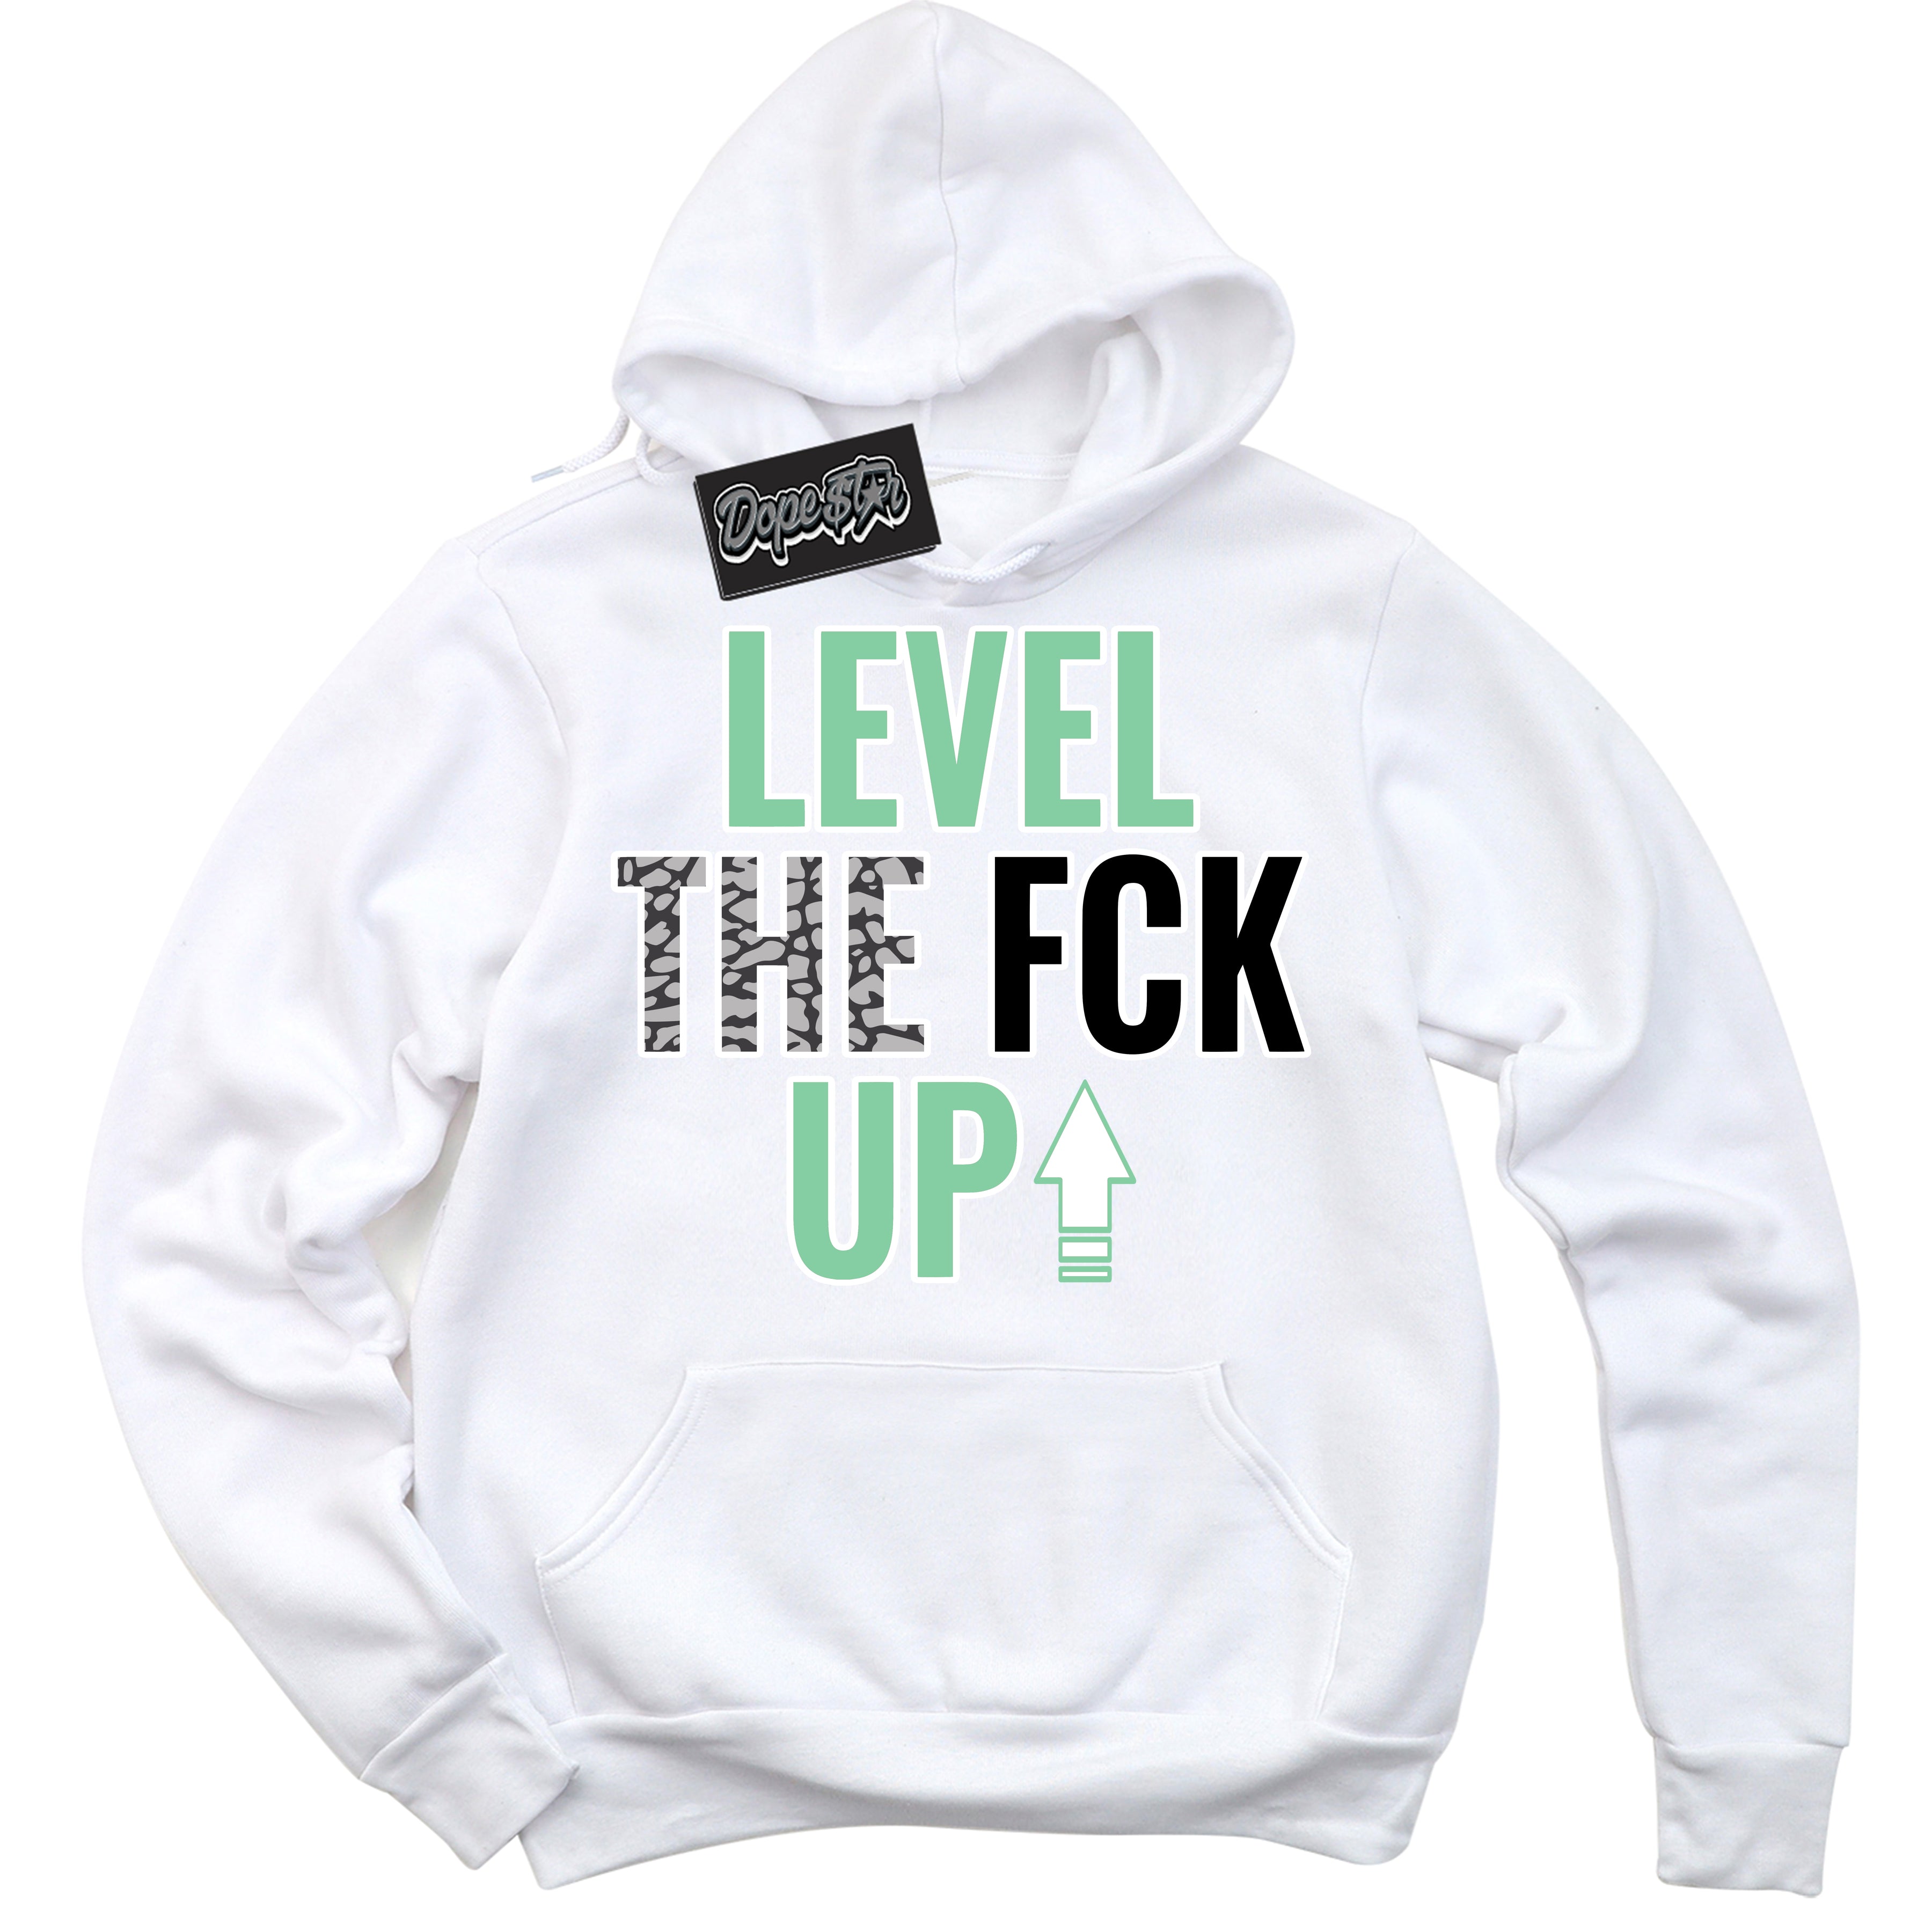 Cool White Graphic DopeStar Hoodie with “ Level The Fck Up “ print, that perfectly matches Green Glow 3s sneakers